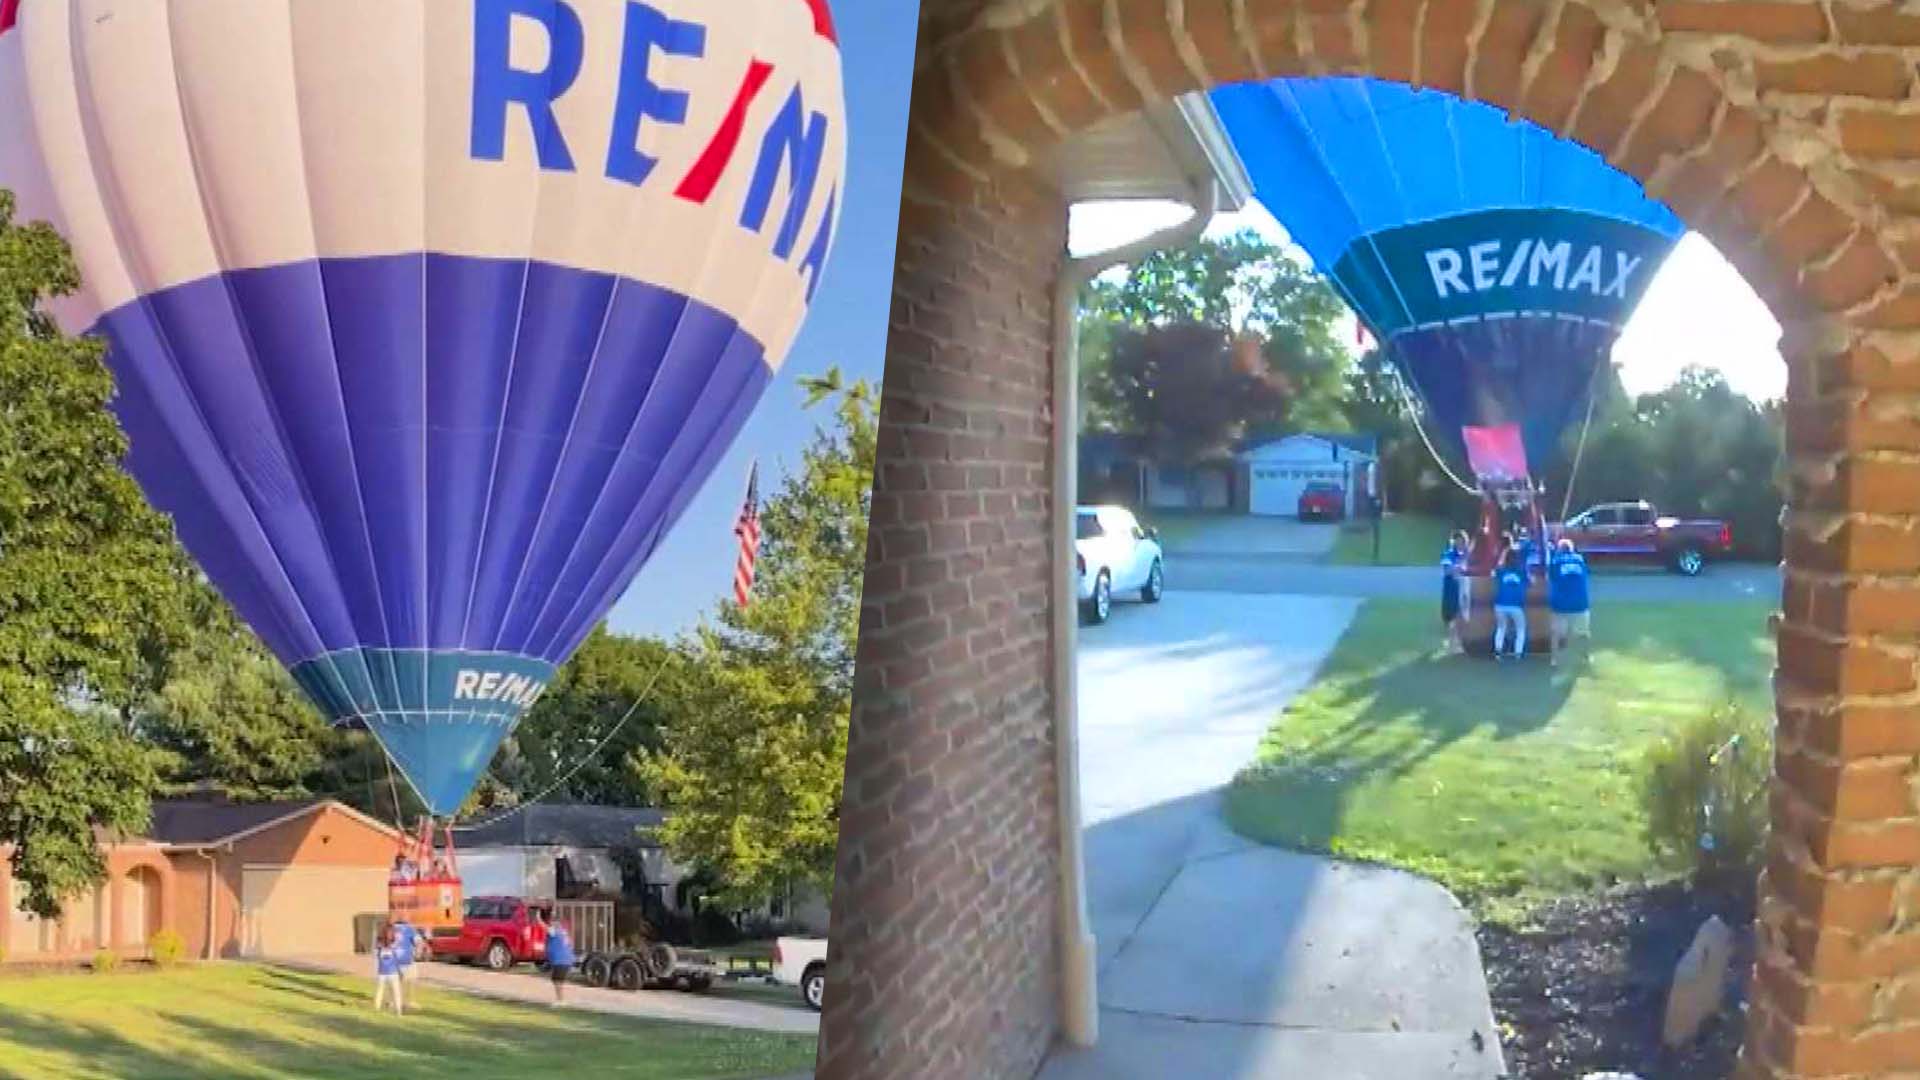 REMAX hot air balloon landing on front lawn / view of balloon from home ring camera